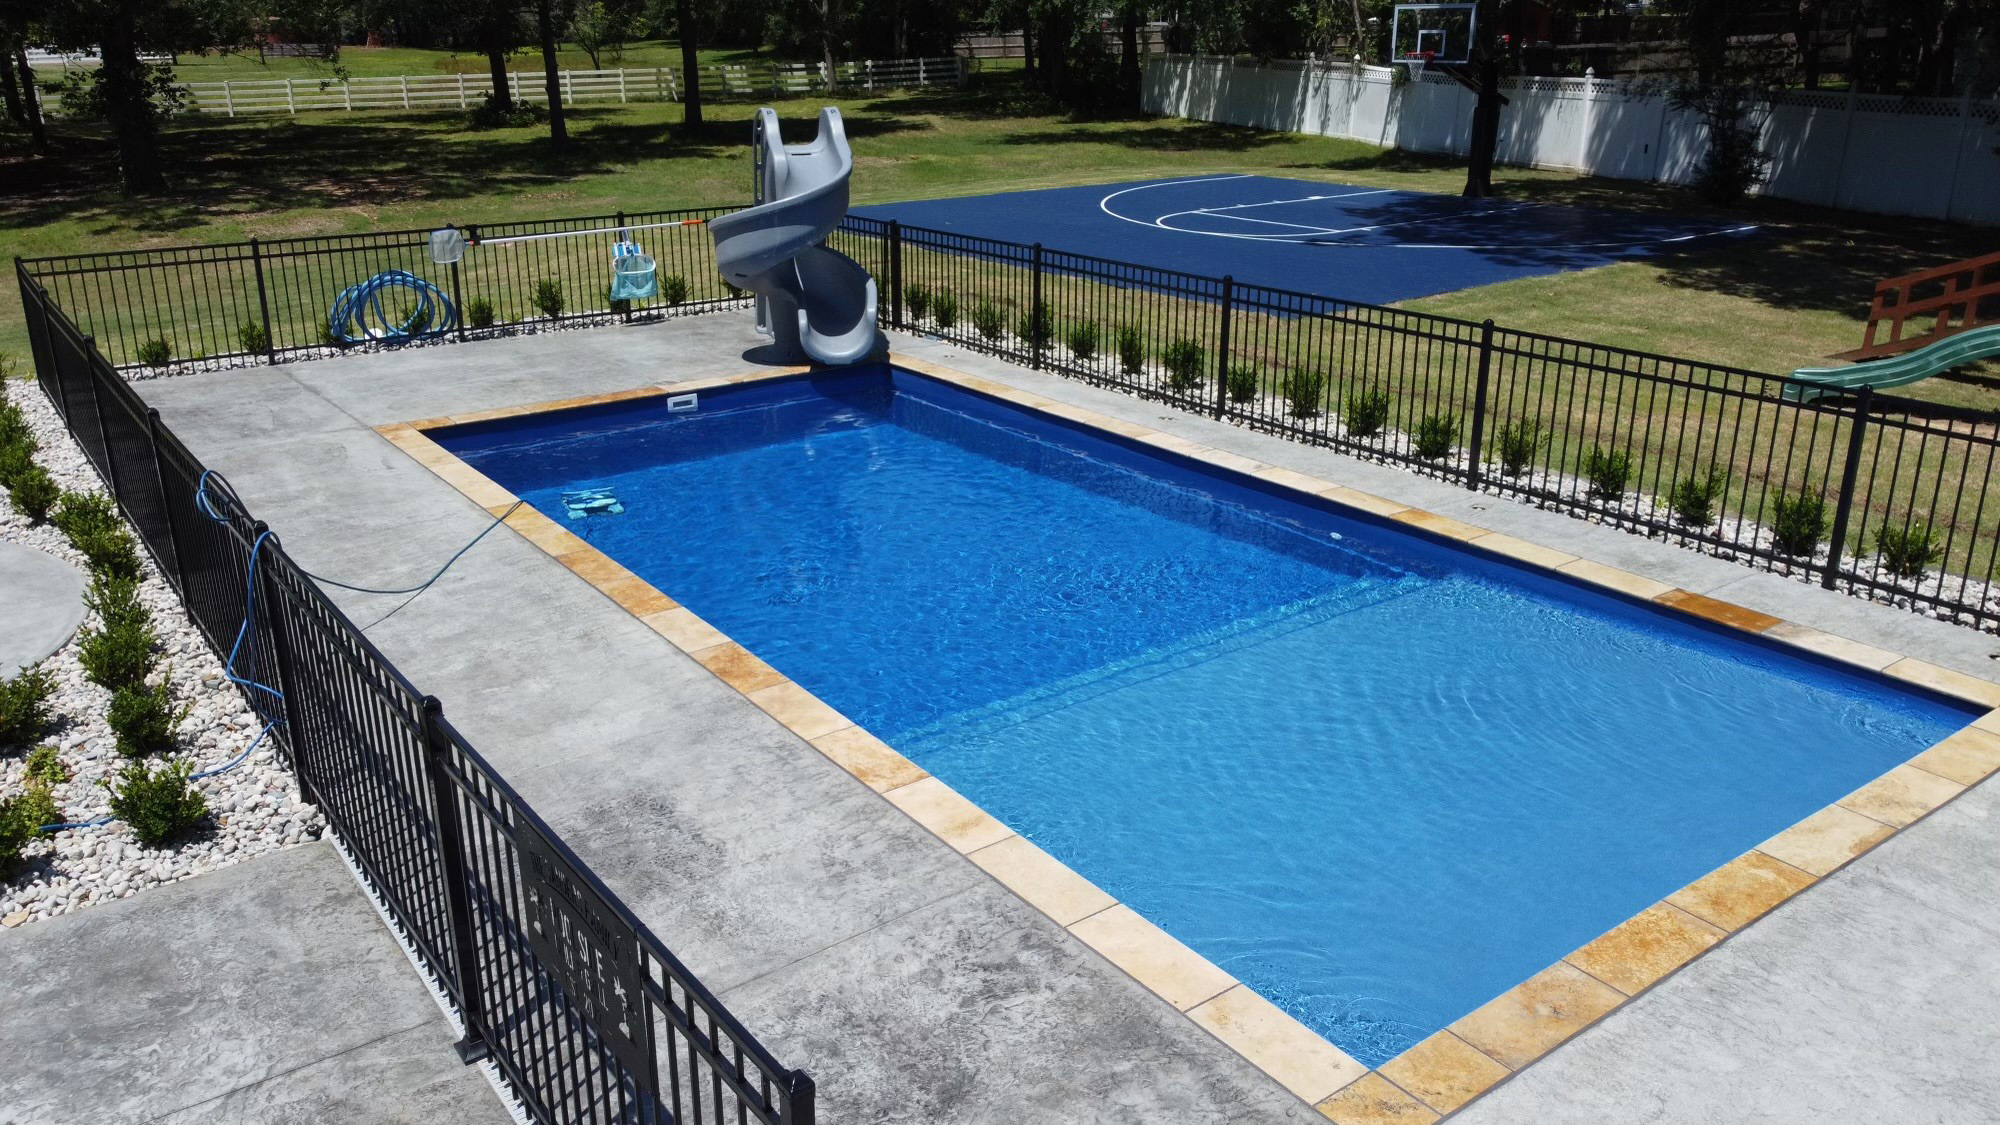 Laguna Style Lonestar Fiberglass Inground Swimming Pools Bandera Texas is a dream come true for a private backyard Oasis staycation without the hassle of leaving